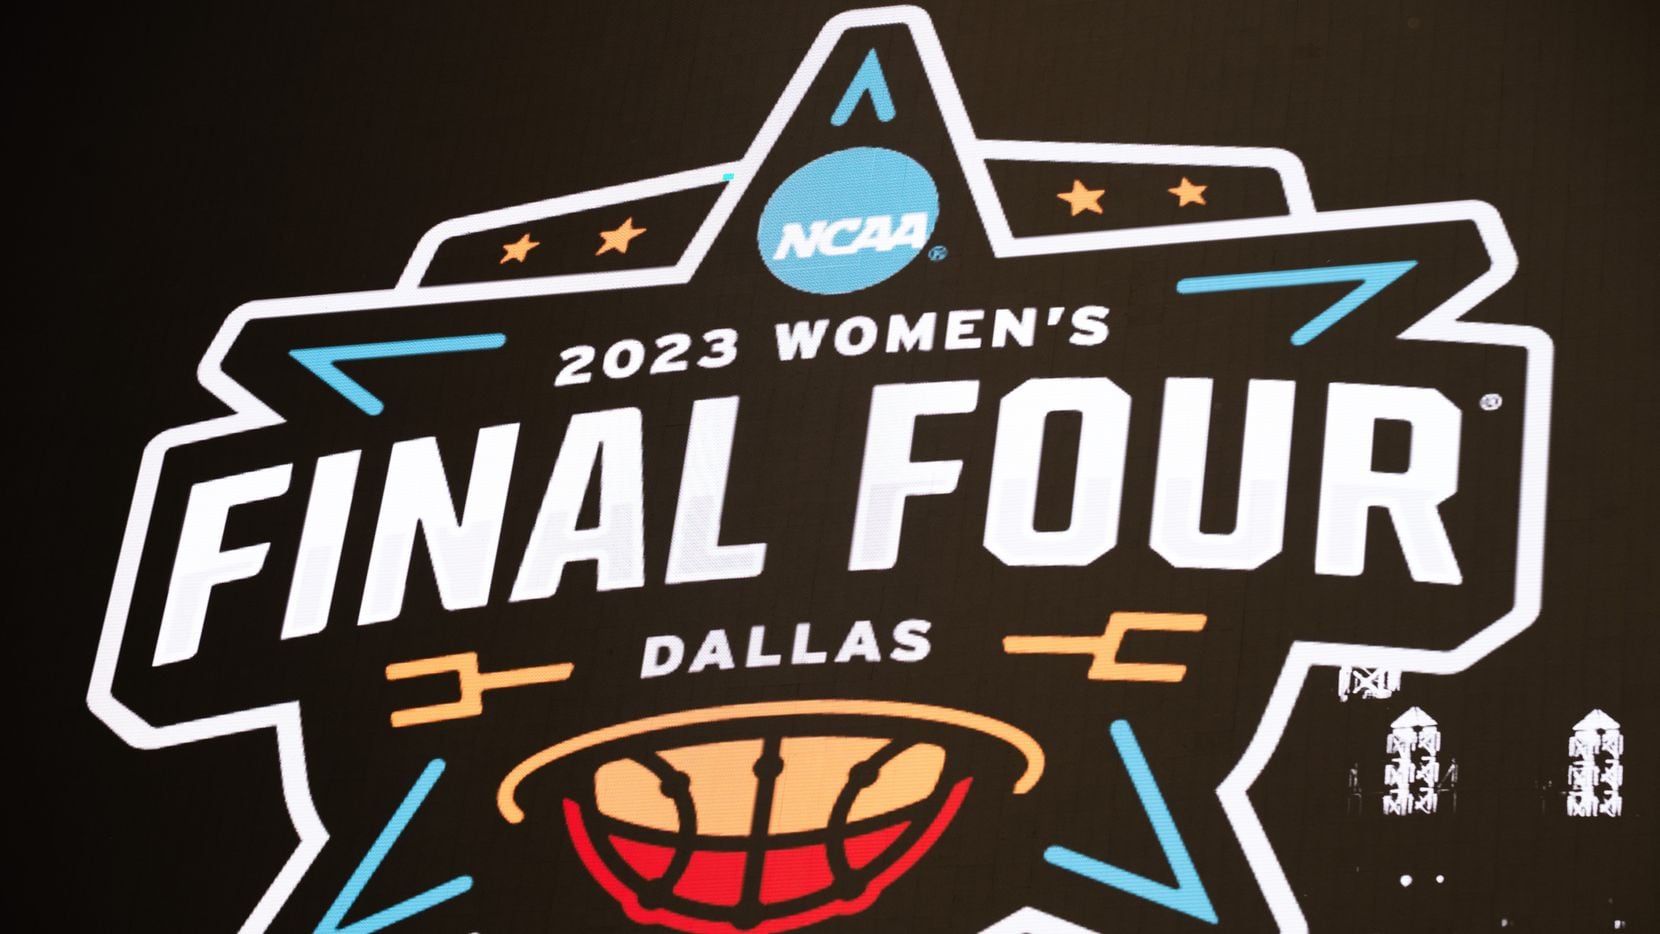 The Dallas 2023 Women's Final Four Logo on display on the giant video board at the AT&T...